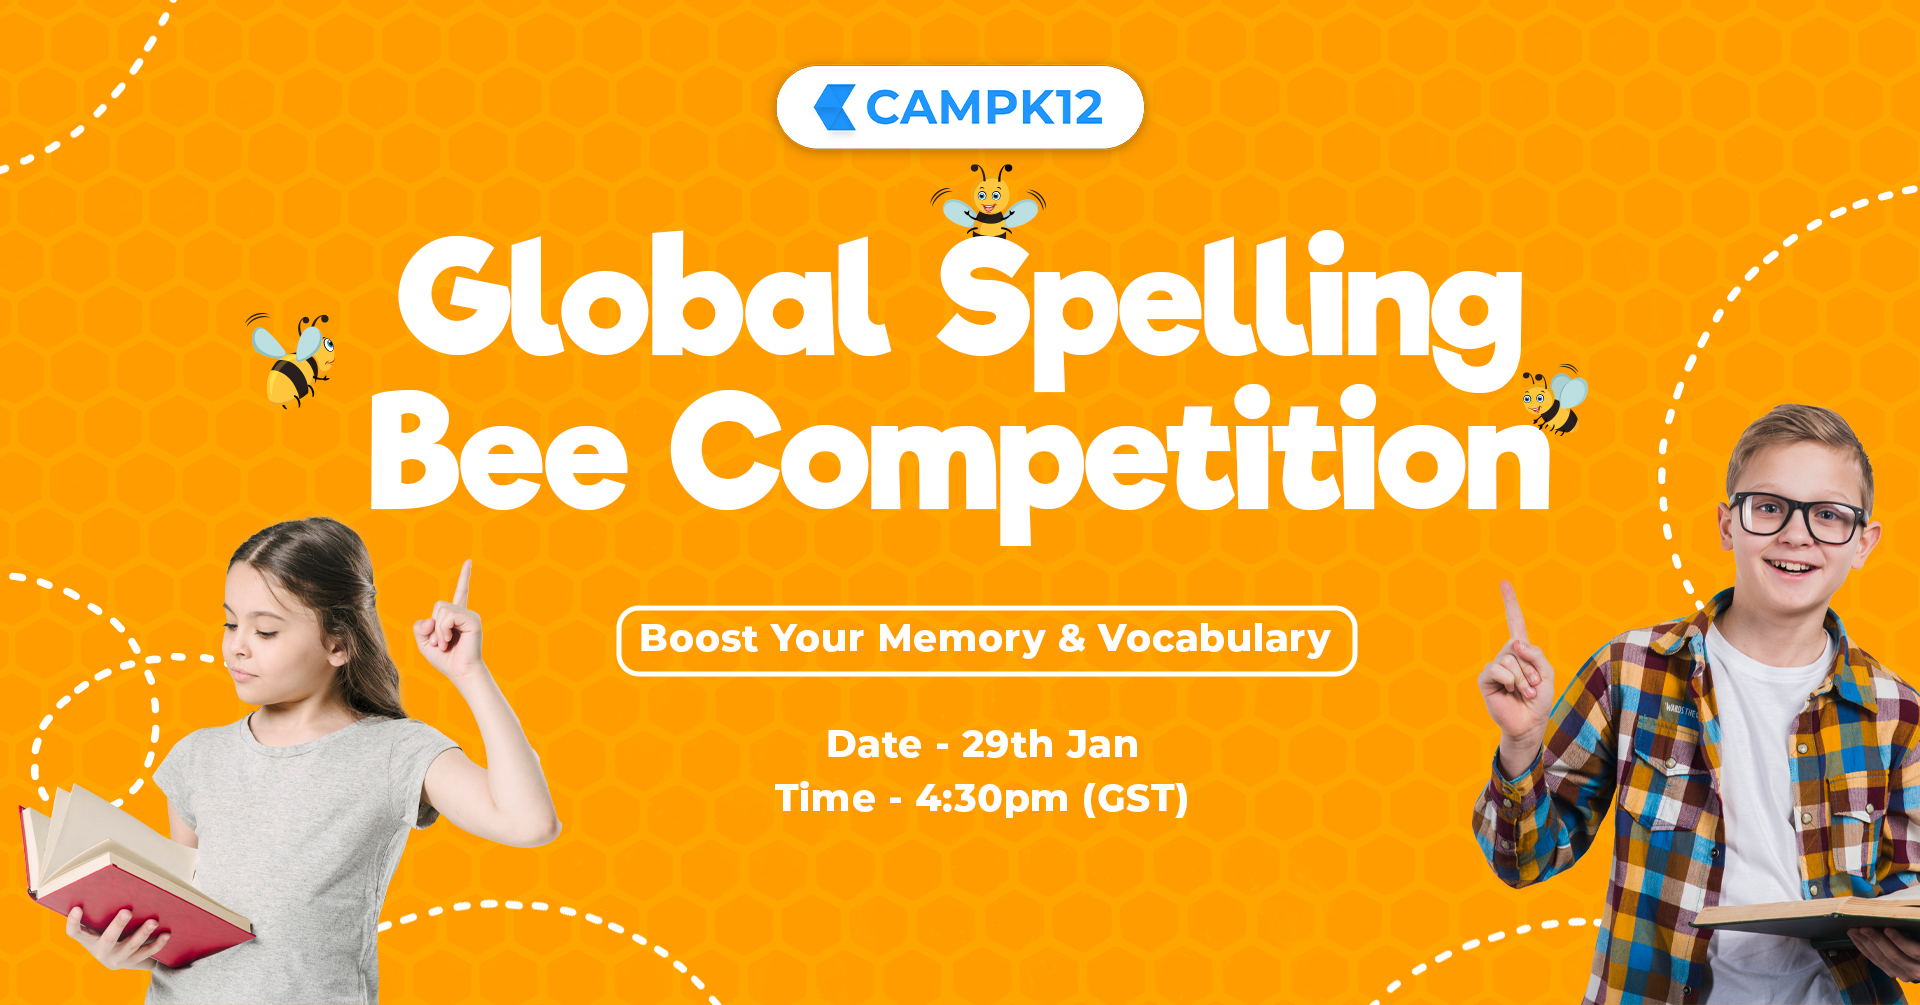 Global Spelling Bee Competition, Online Event